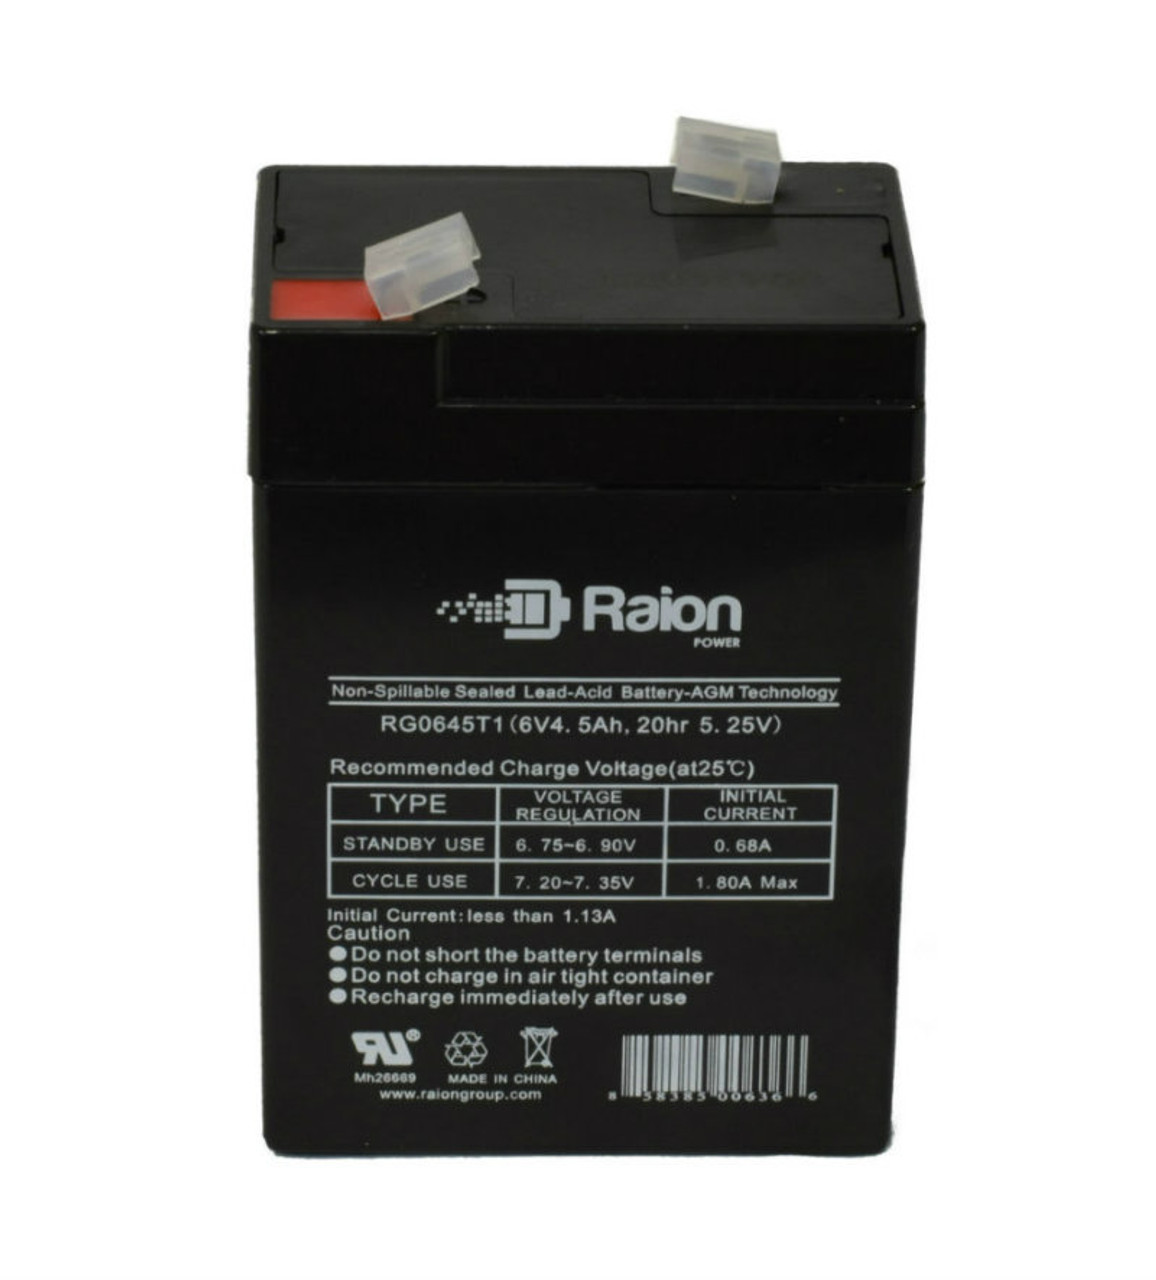 Raion Power RG0645T1 Replacement Battery Cartridge for TOBBI 12V Kid Ride on Truck W/ Parental Remote Control